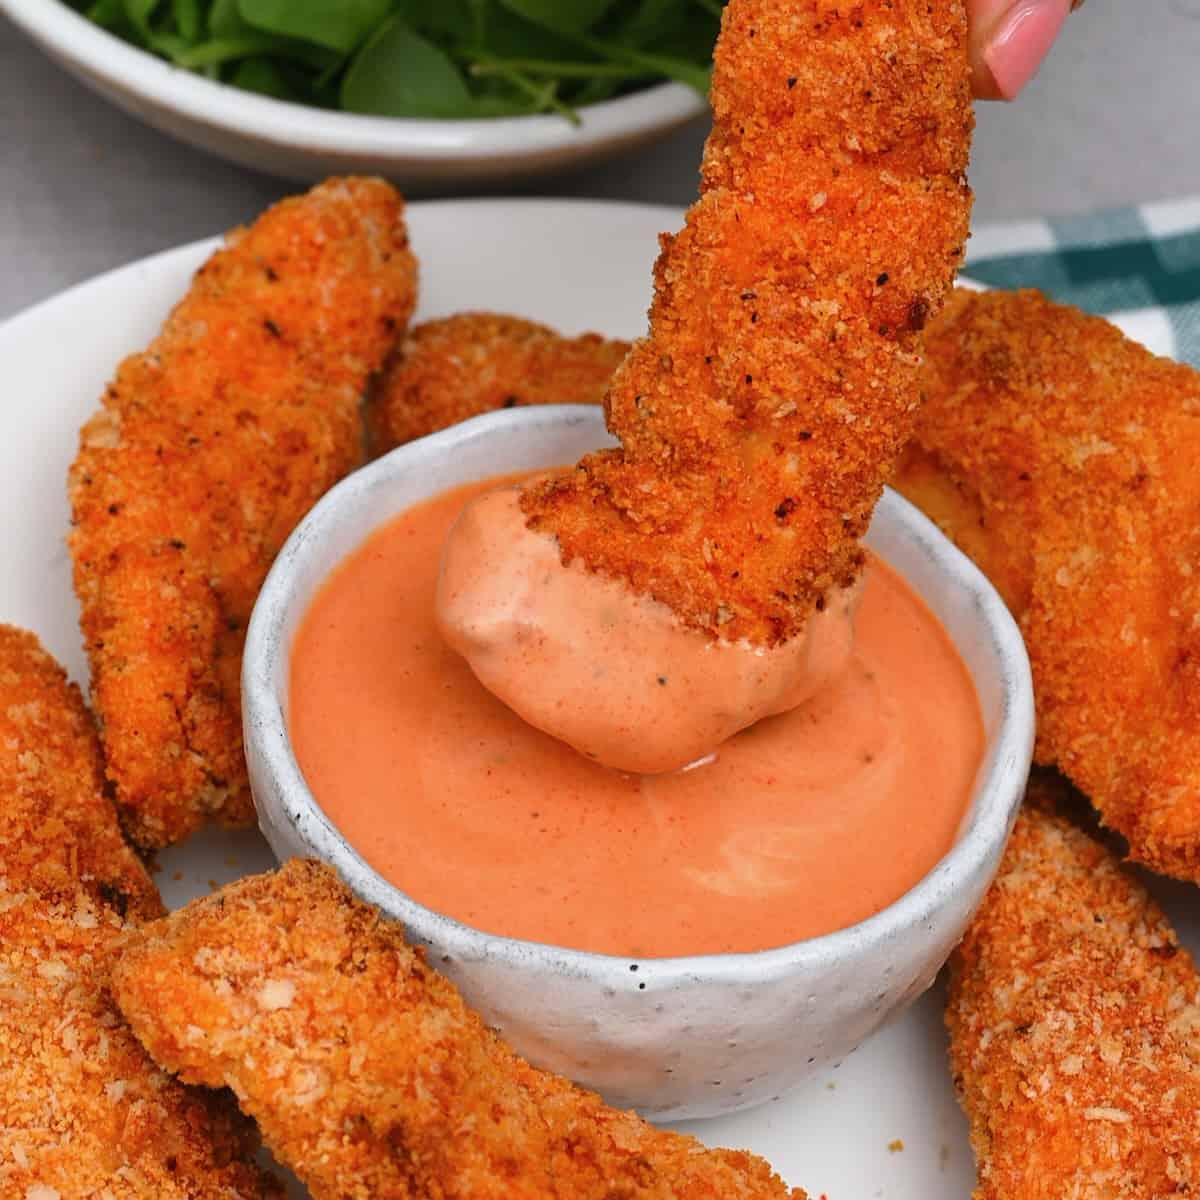 Dipping chicken tenders in cane's sauce